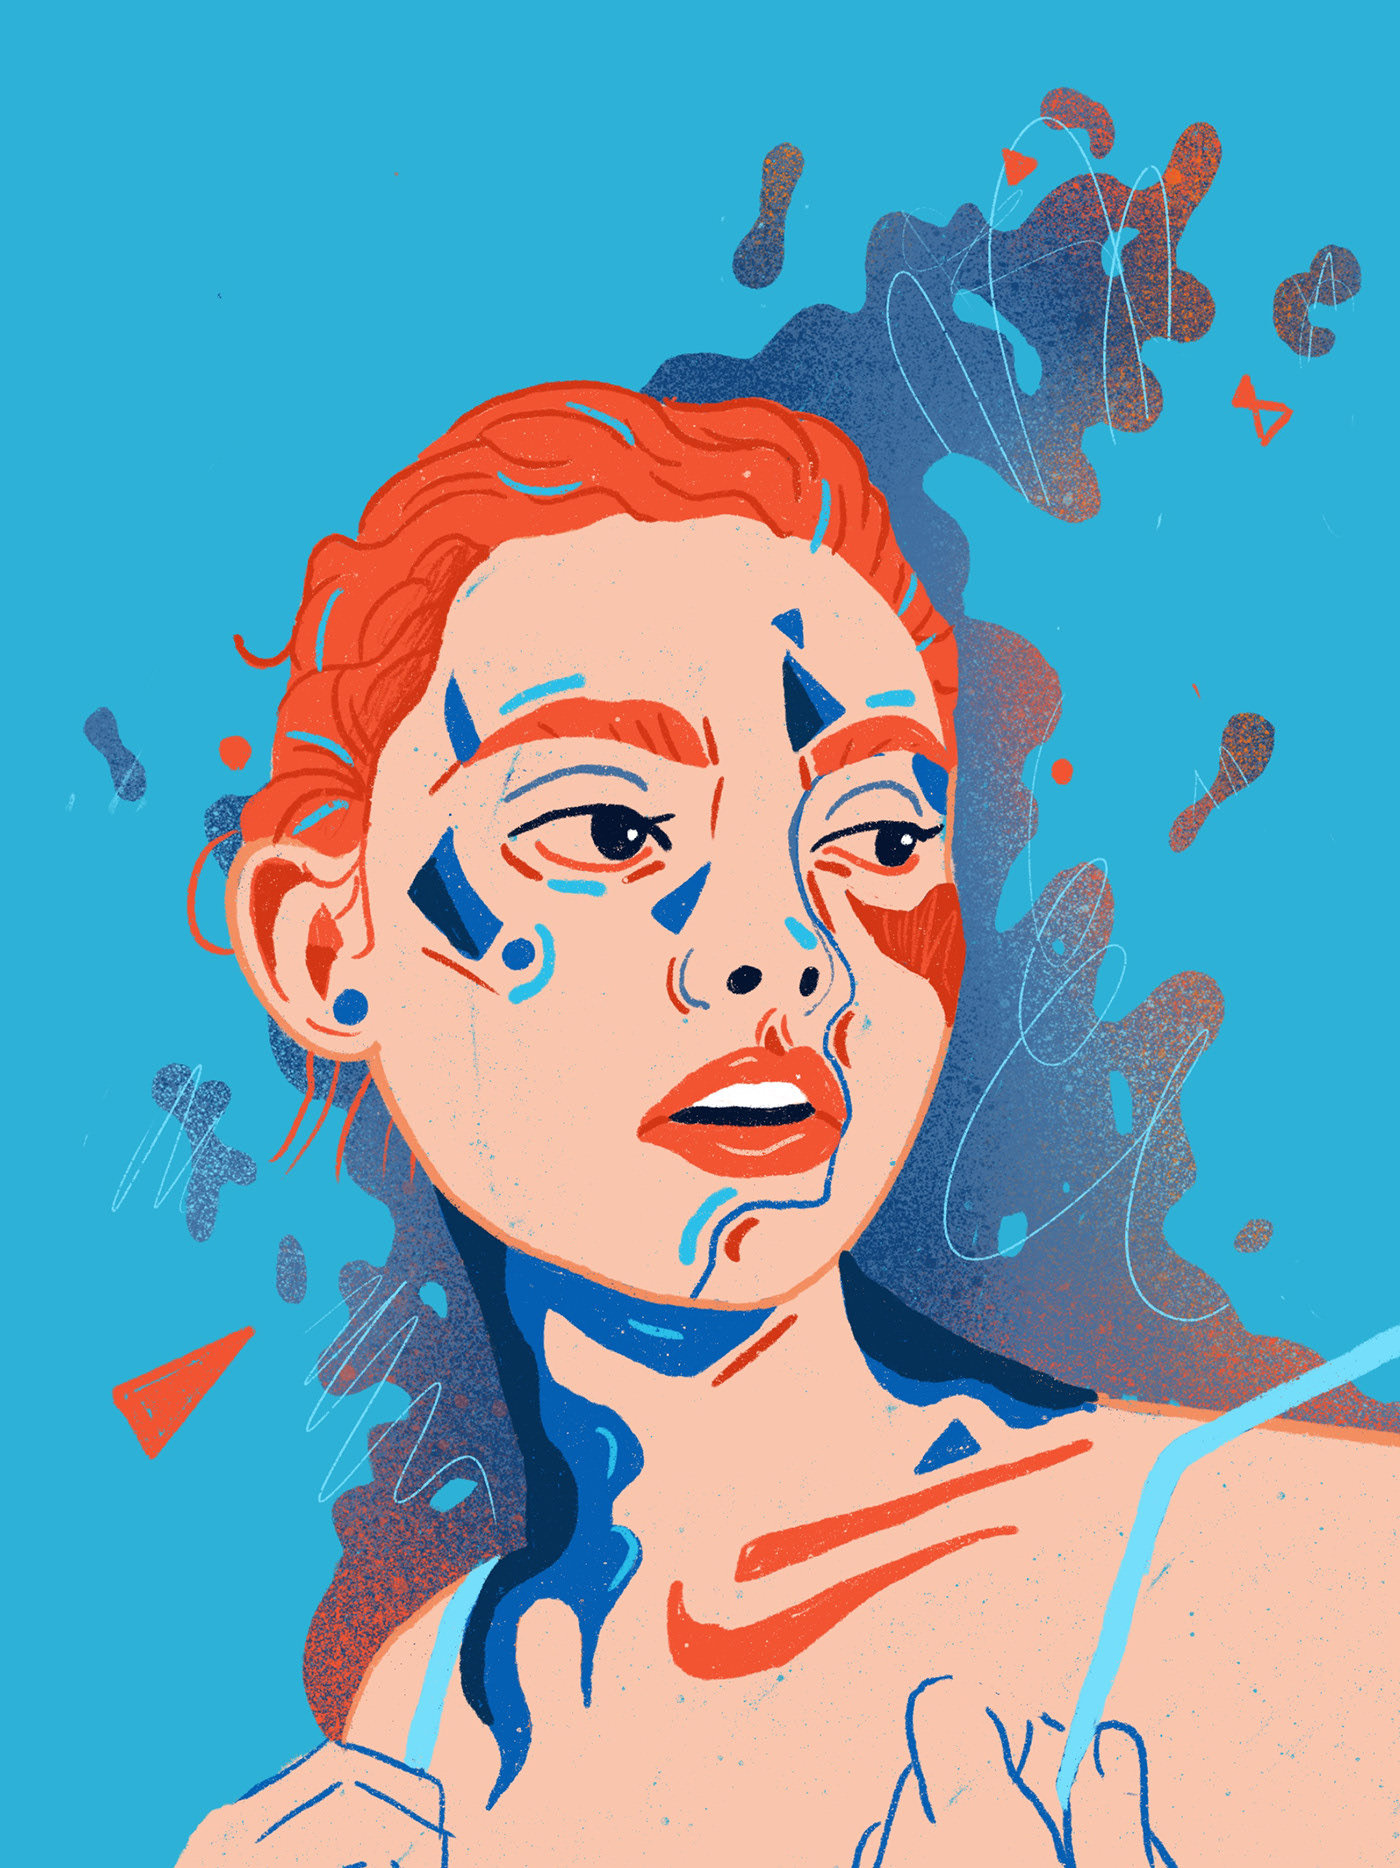 Illustrated portraits - New style on Behance